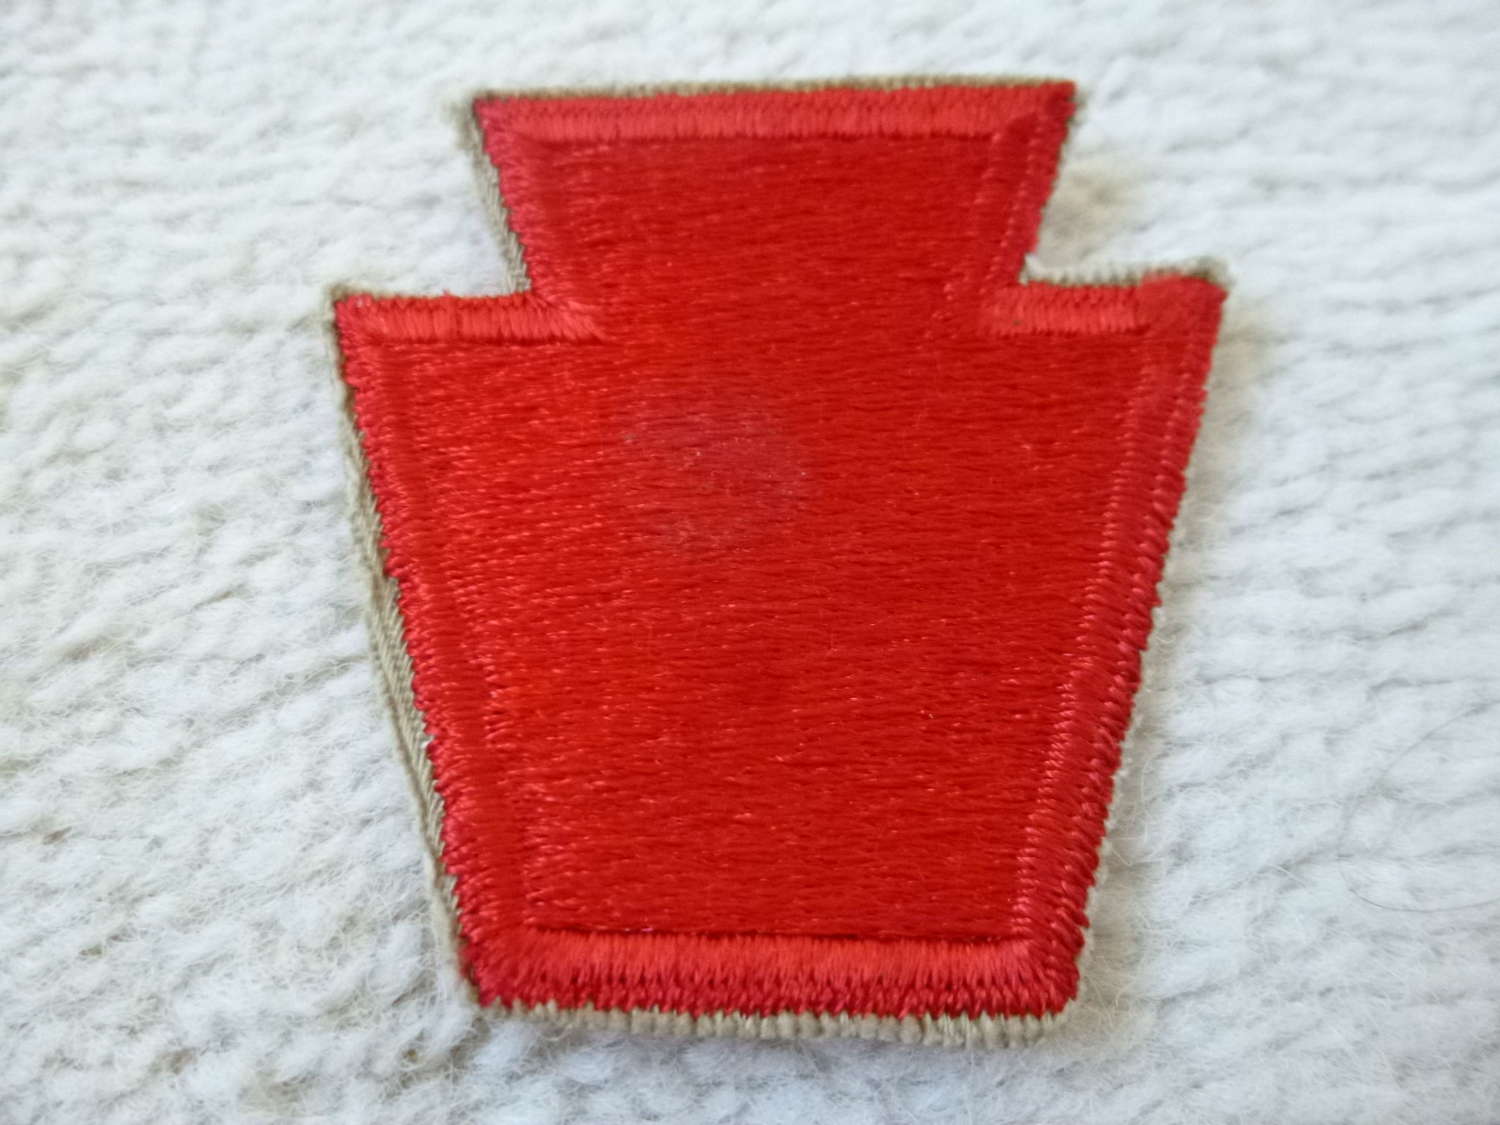 US army 28th infantry division patch